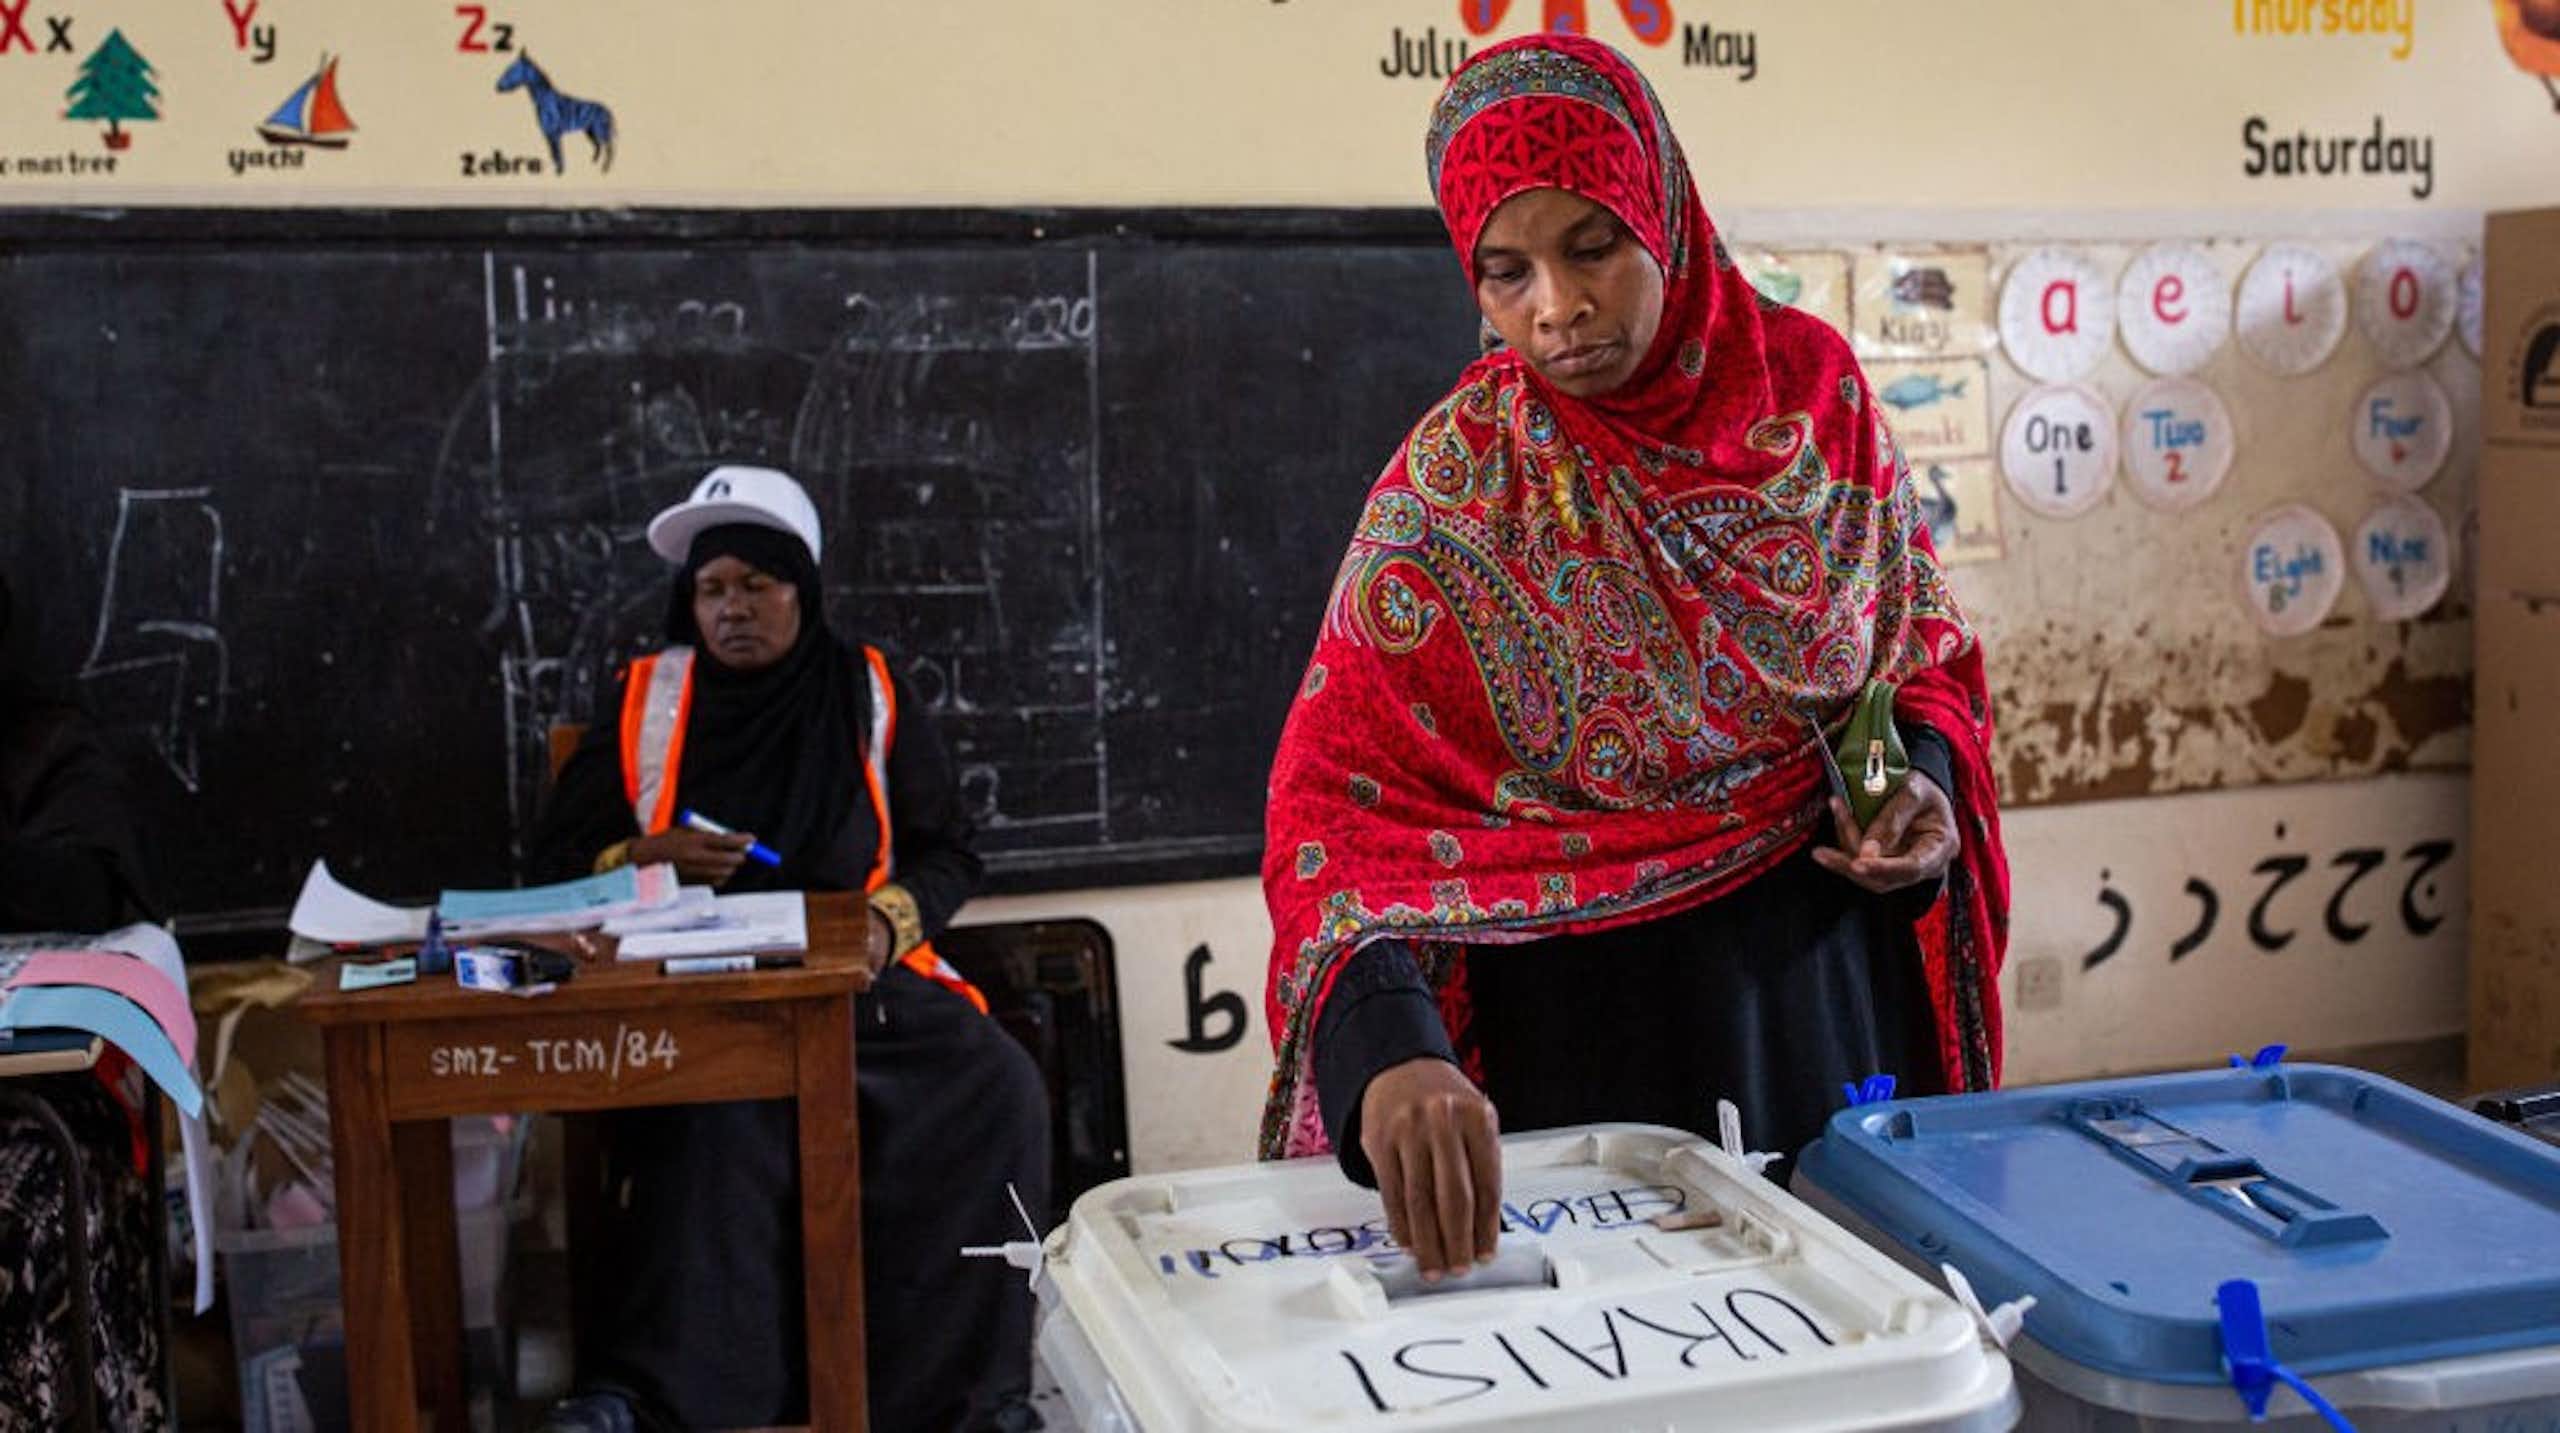 A woman wearing a headscarf places her ballot into a box in a school classroom.